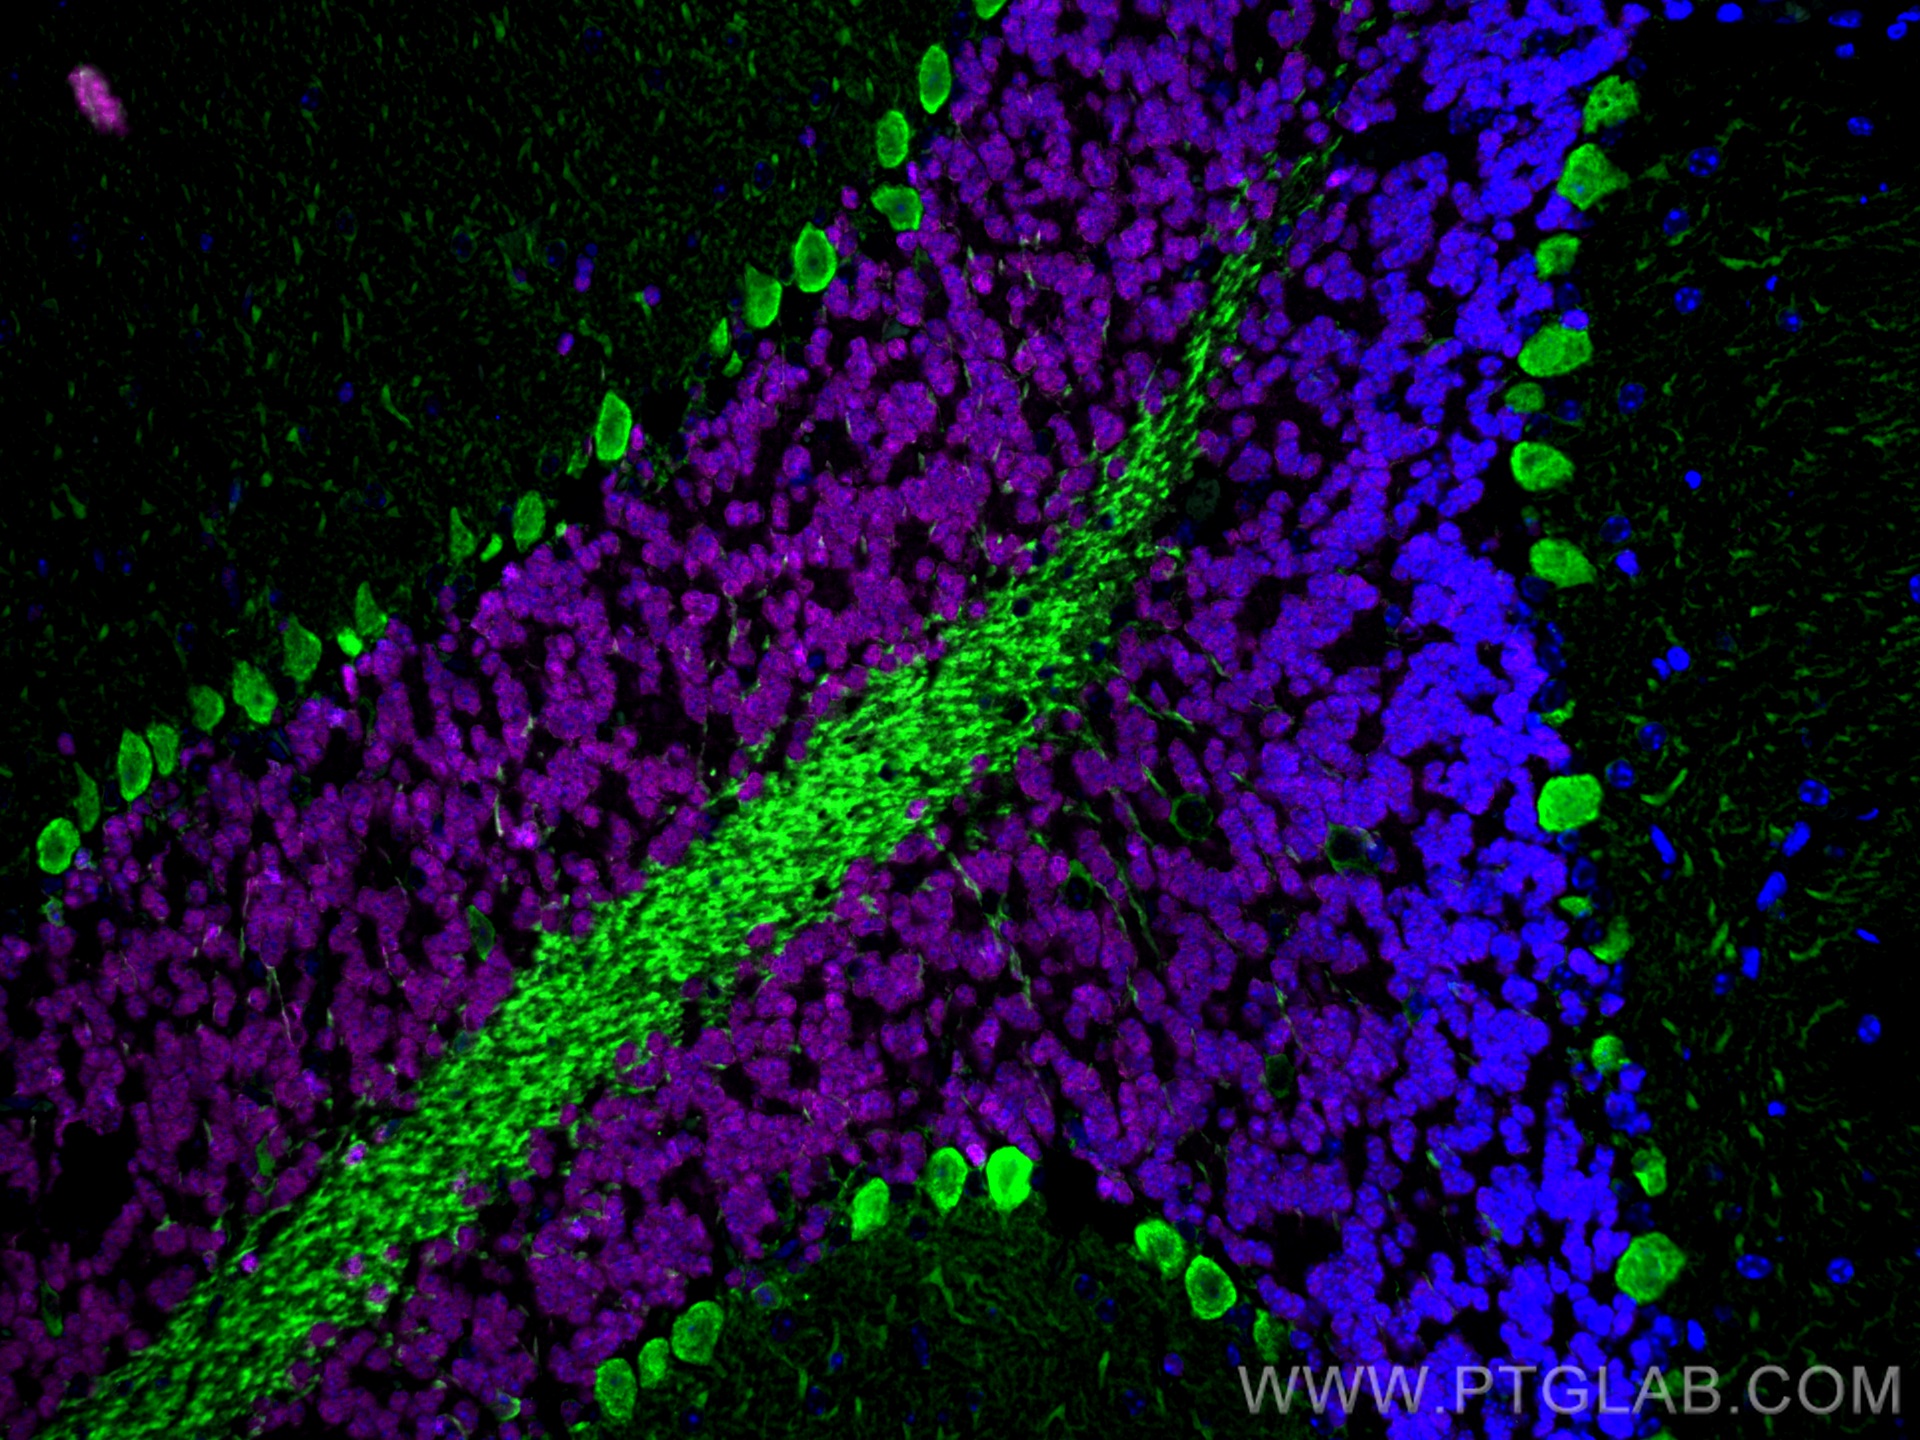 Immunofluorescence of mouse cerebellum: mouse cerebellum FFPE section was stained with Rabbit anti-NeuN polyclonal antibody (26975-1-AP, 1:200, magenta) and mouse anti-Calbindin-D28k monoclonal antibody (66394-1-Ig, 1:200, green). Multi-rAb CoraLite® Plus 647 conjugated Recombinant Goat anti-rabbit secondary antibody (RGAR005, 1:500) and Multi-rAb CoraLite® Plus 488 conjugated Goat Anti-Mouse Recombinant Secondary Antibody (H+L) were used for detection (RGAM002, 1:500) . 